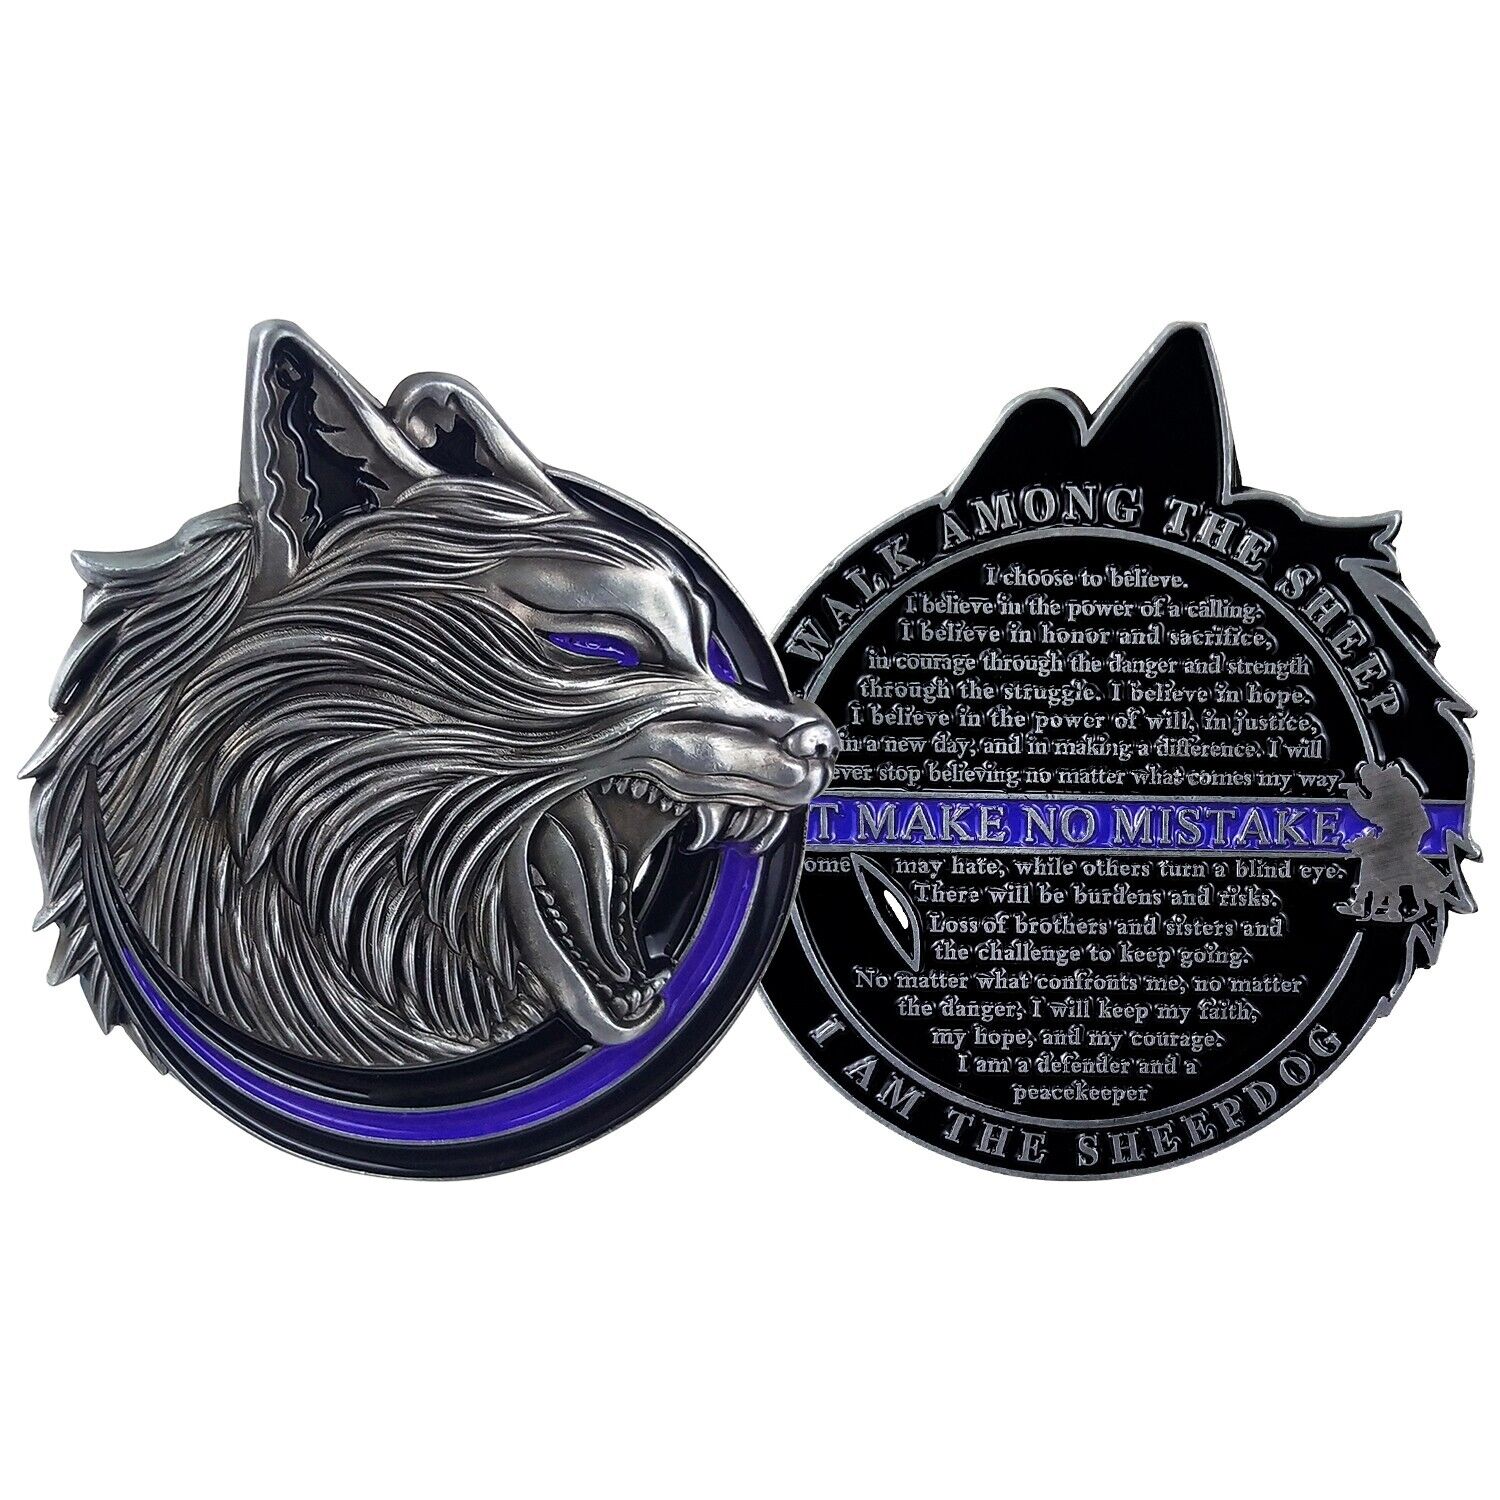 Police Sheep Dog Challenge Coin A Thin Blue Line Officers Make No Mistake Prayer